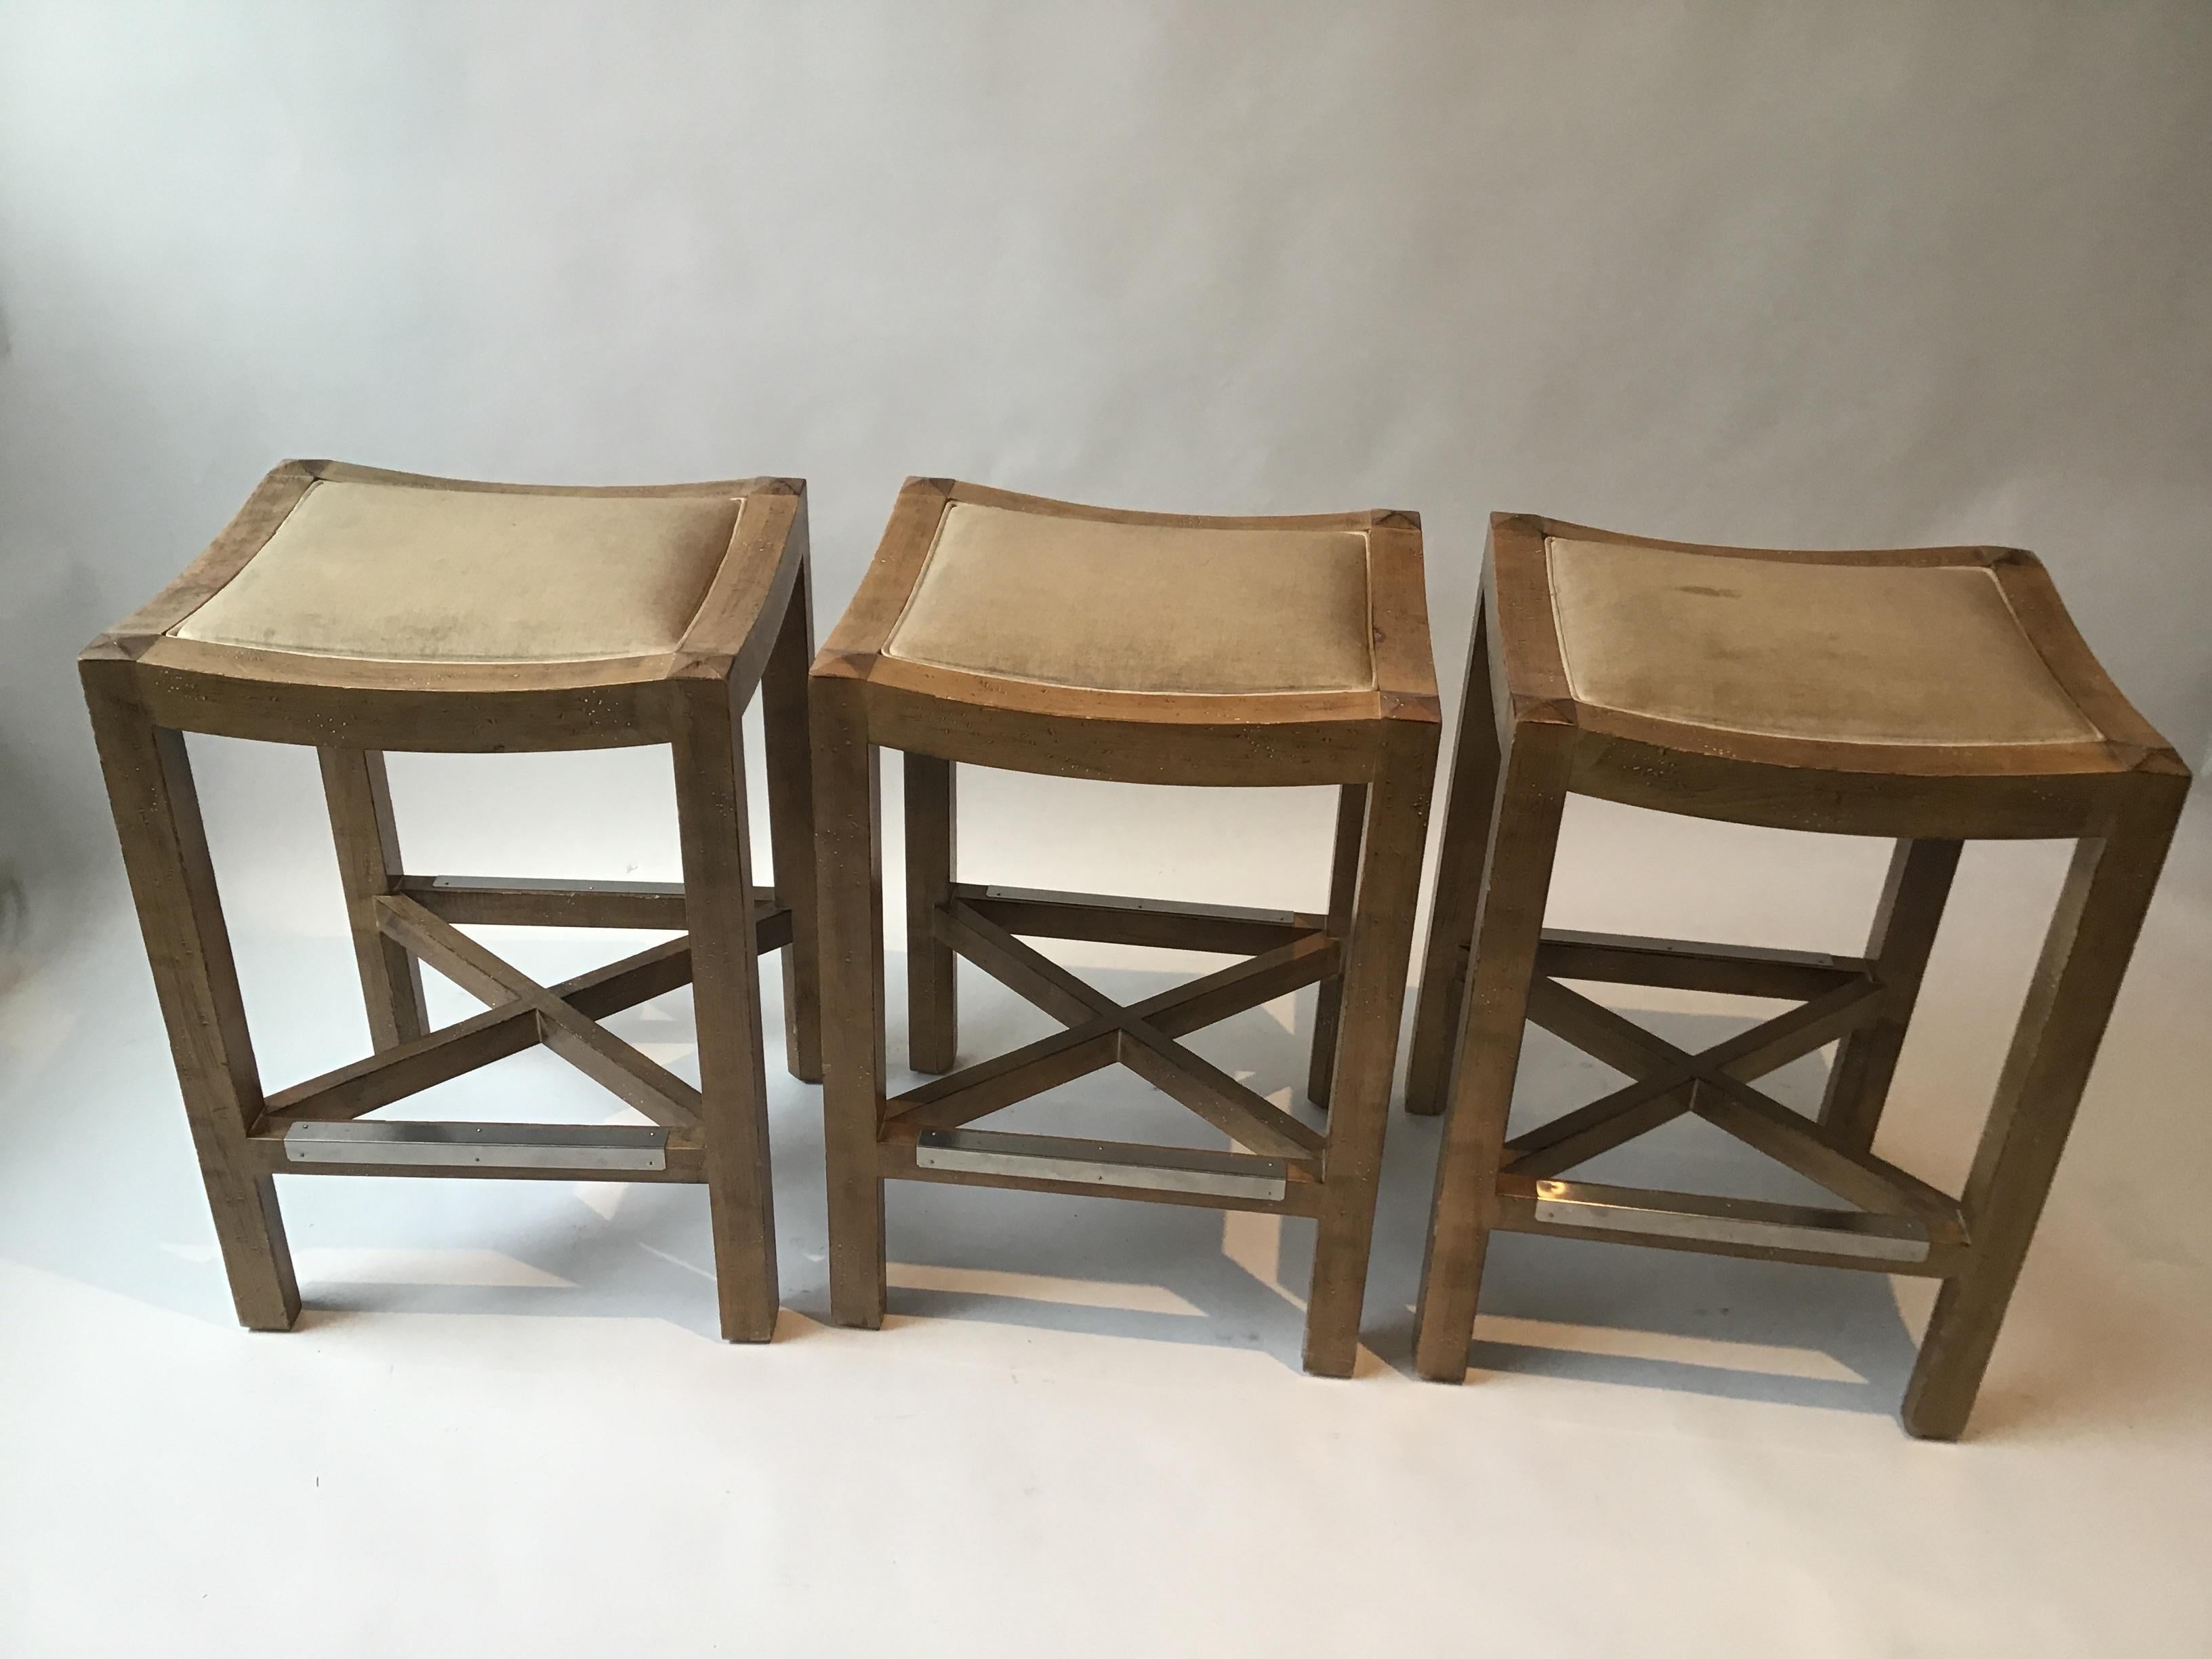 3 wood counter stools by Lee Industries. Some stains on fabric. Measures: 25.5” high.